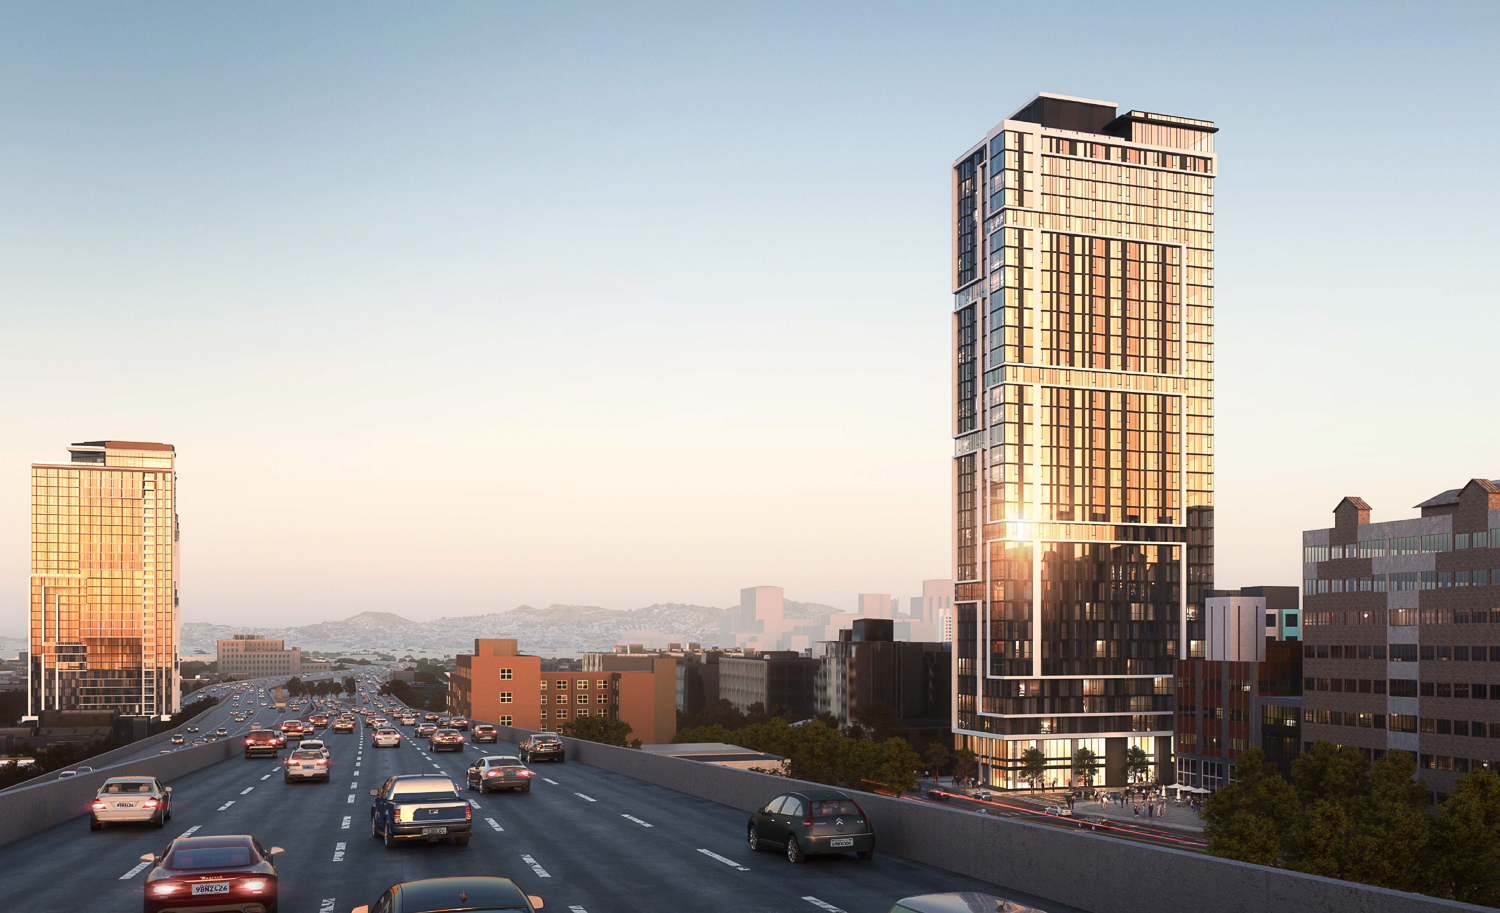 650 Harrison Street with 598 Bryant Street in the background, rendering by BDE Architecture